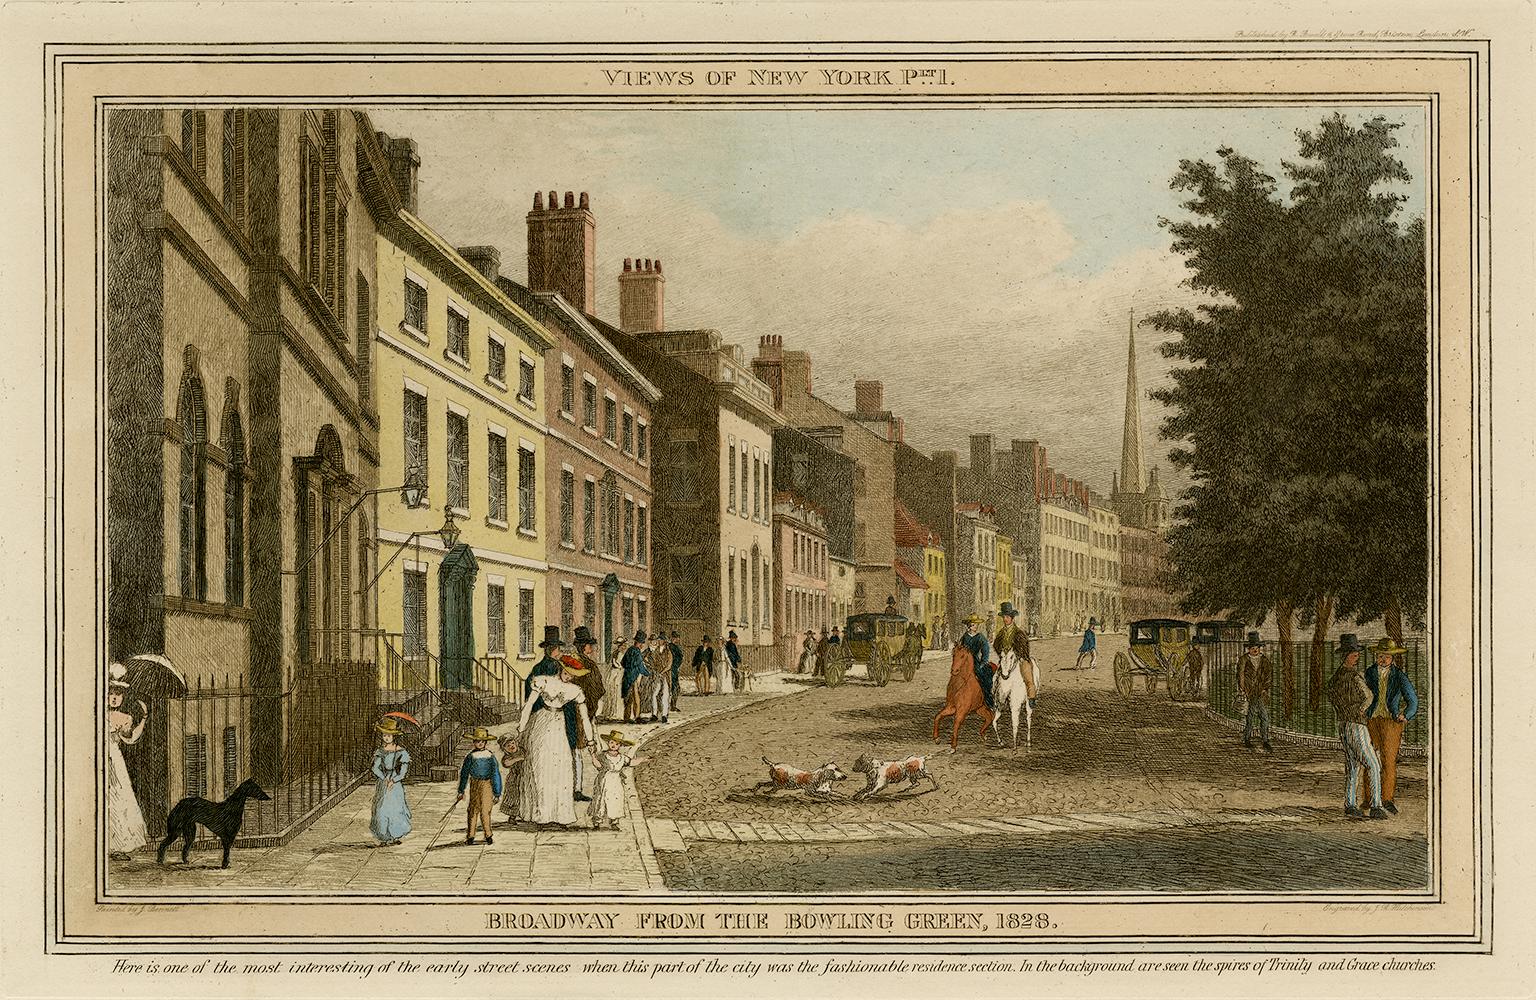 Broadway from the Bowling Green, 1828   — early New York City, hand-coloring